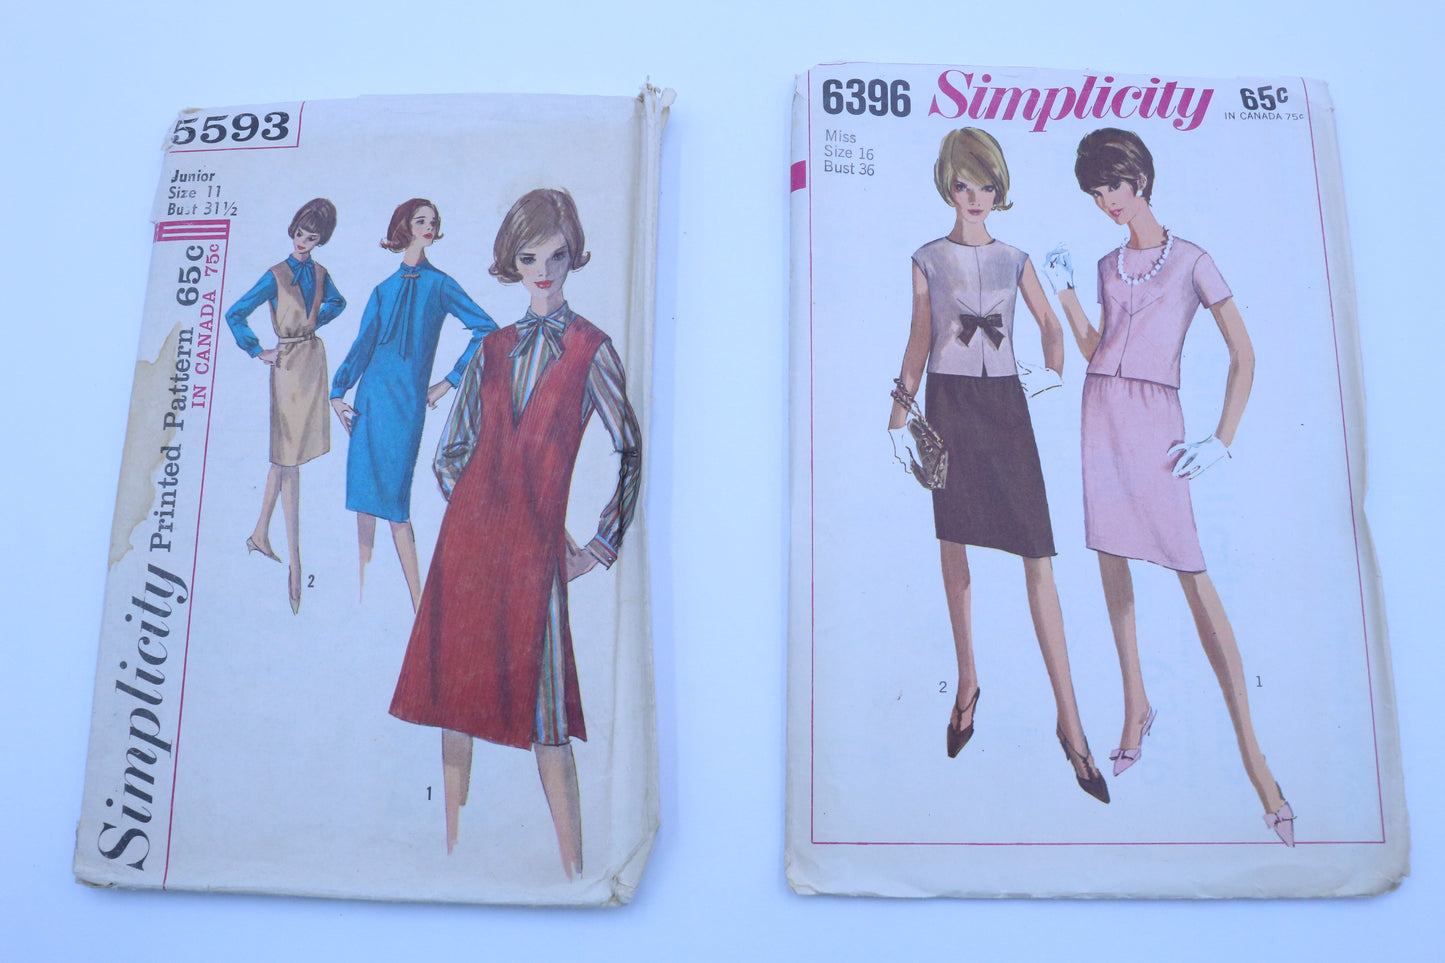 Simplicity 6396 Sewing Pattern or Simplicity 5593 Sewing Pattern